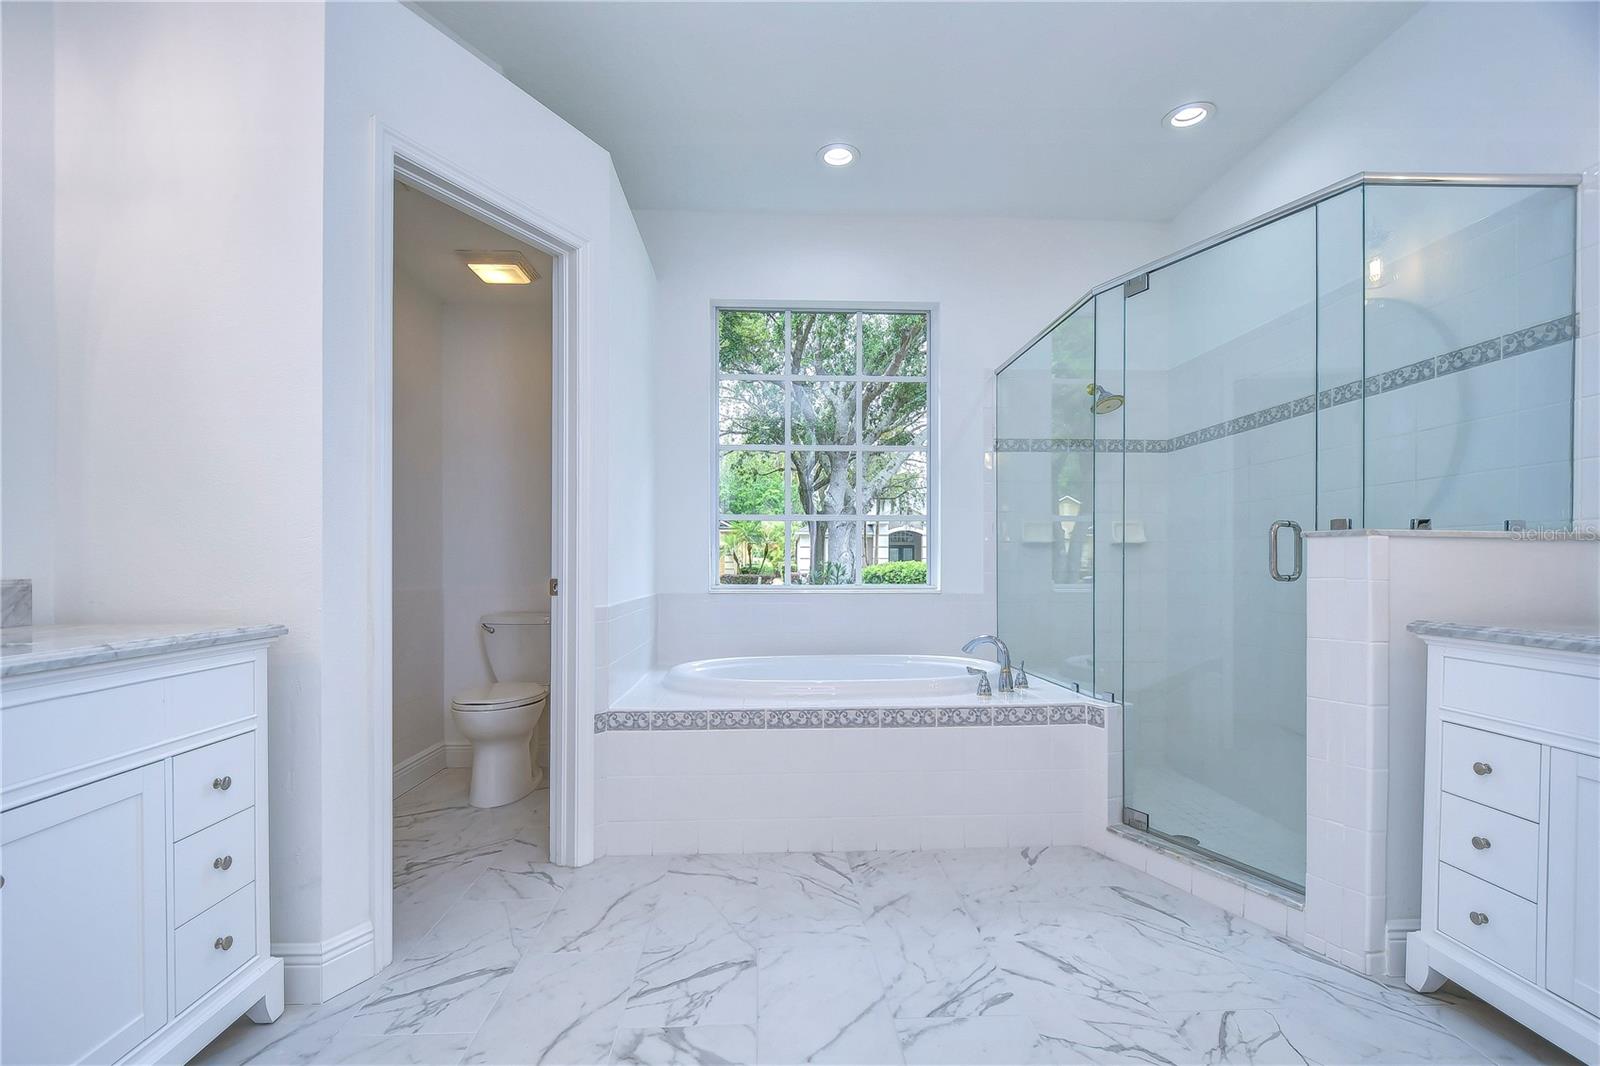 Beautifully remodeled with separate vanities, HUGE walk-in shower and garden tub!